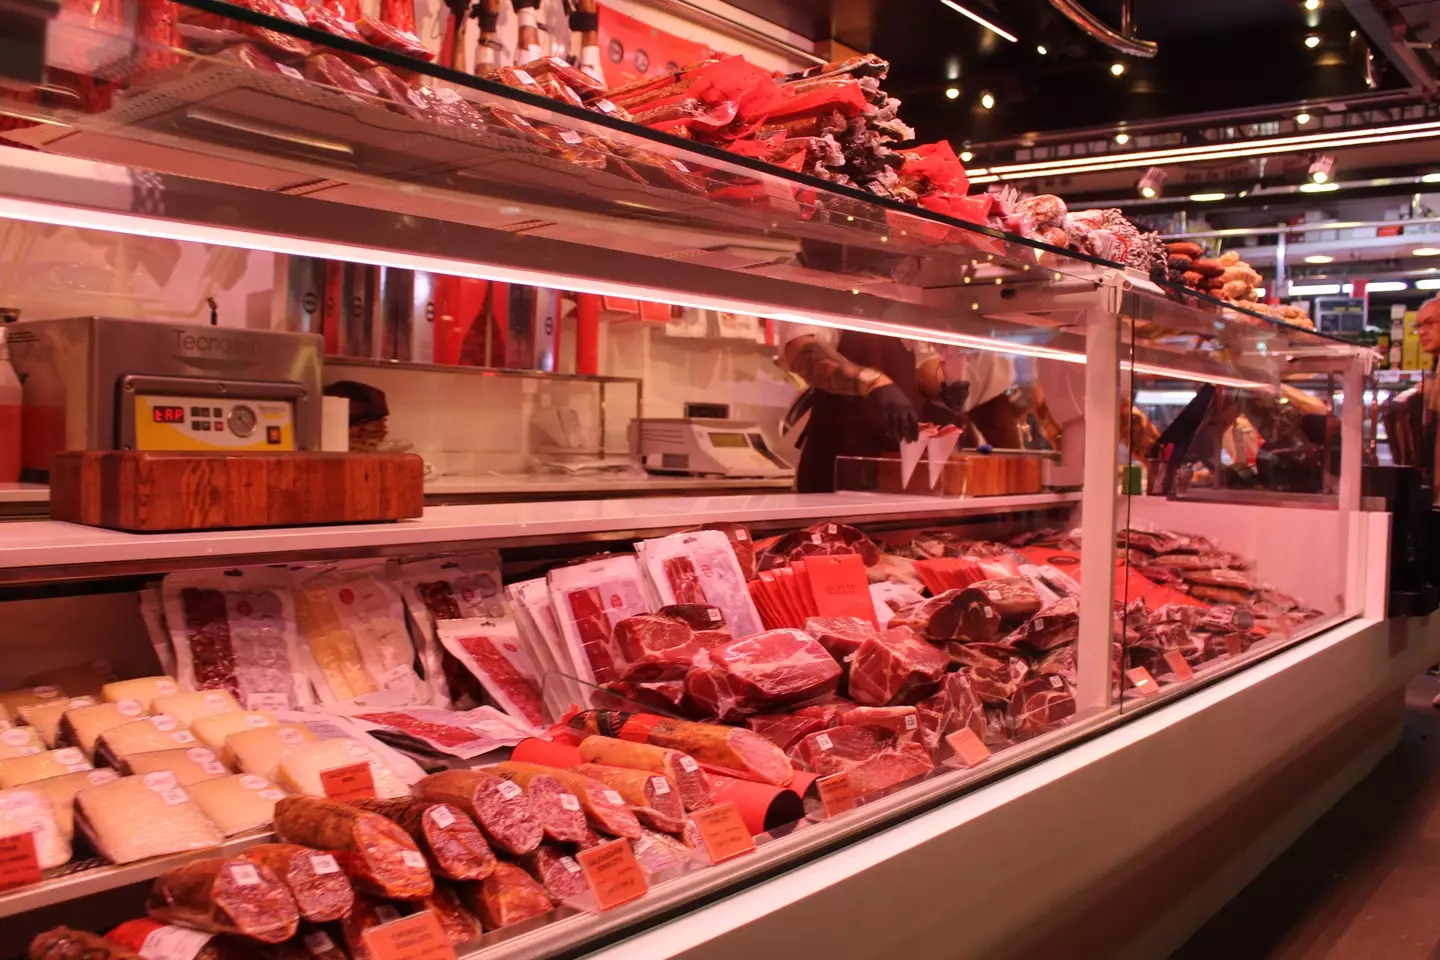 The CDC has been able to trace the deadly outbreak to deli meat and cheese.